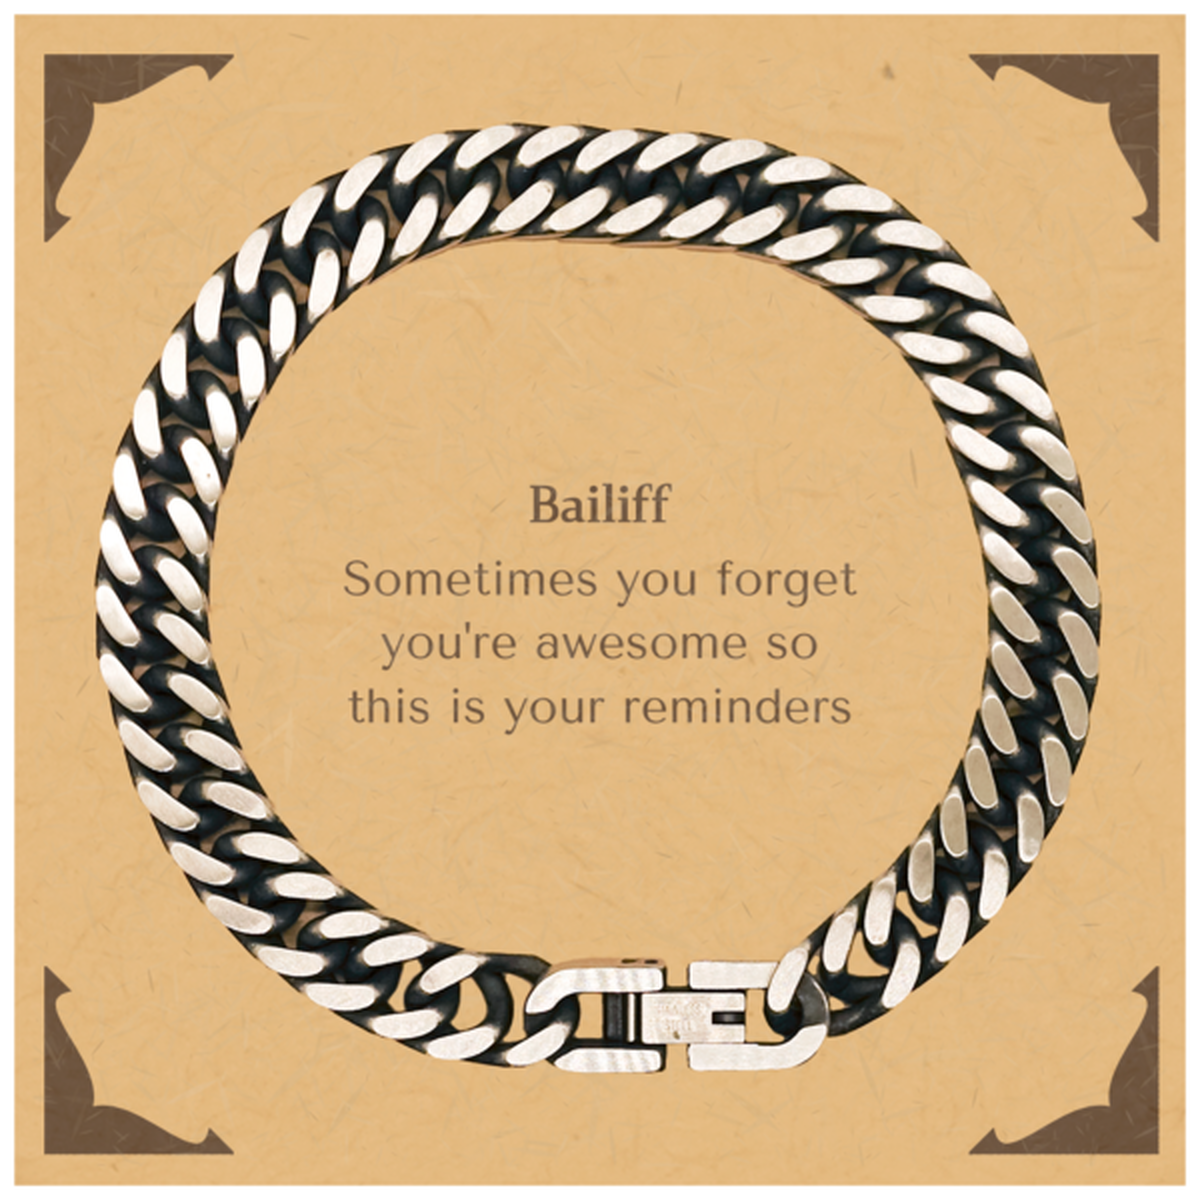 Sentimental Bailiff Cuban Link Chain Bracelet, Bailiff Sometimes you forget you're awesome so this is your reminders, Graduation Christmas Birthday Gifts for Bailiff, Men, Women, Coworkers